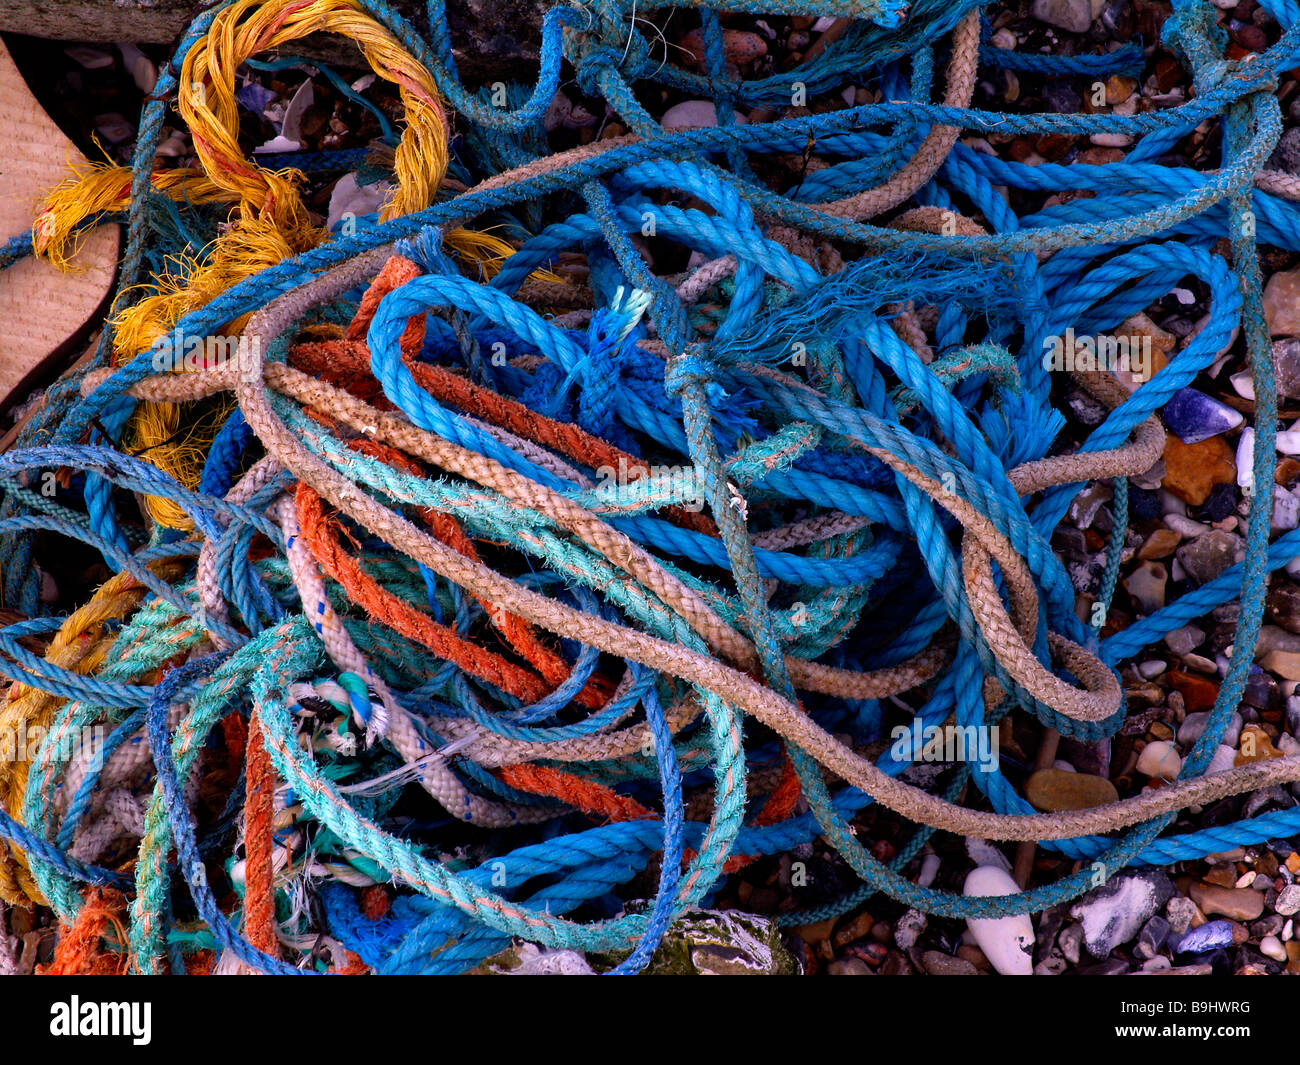 diffent colored rope in a pile Stock Photo